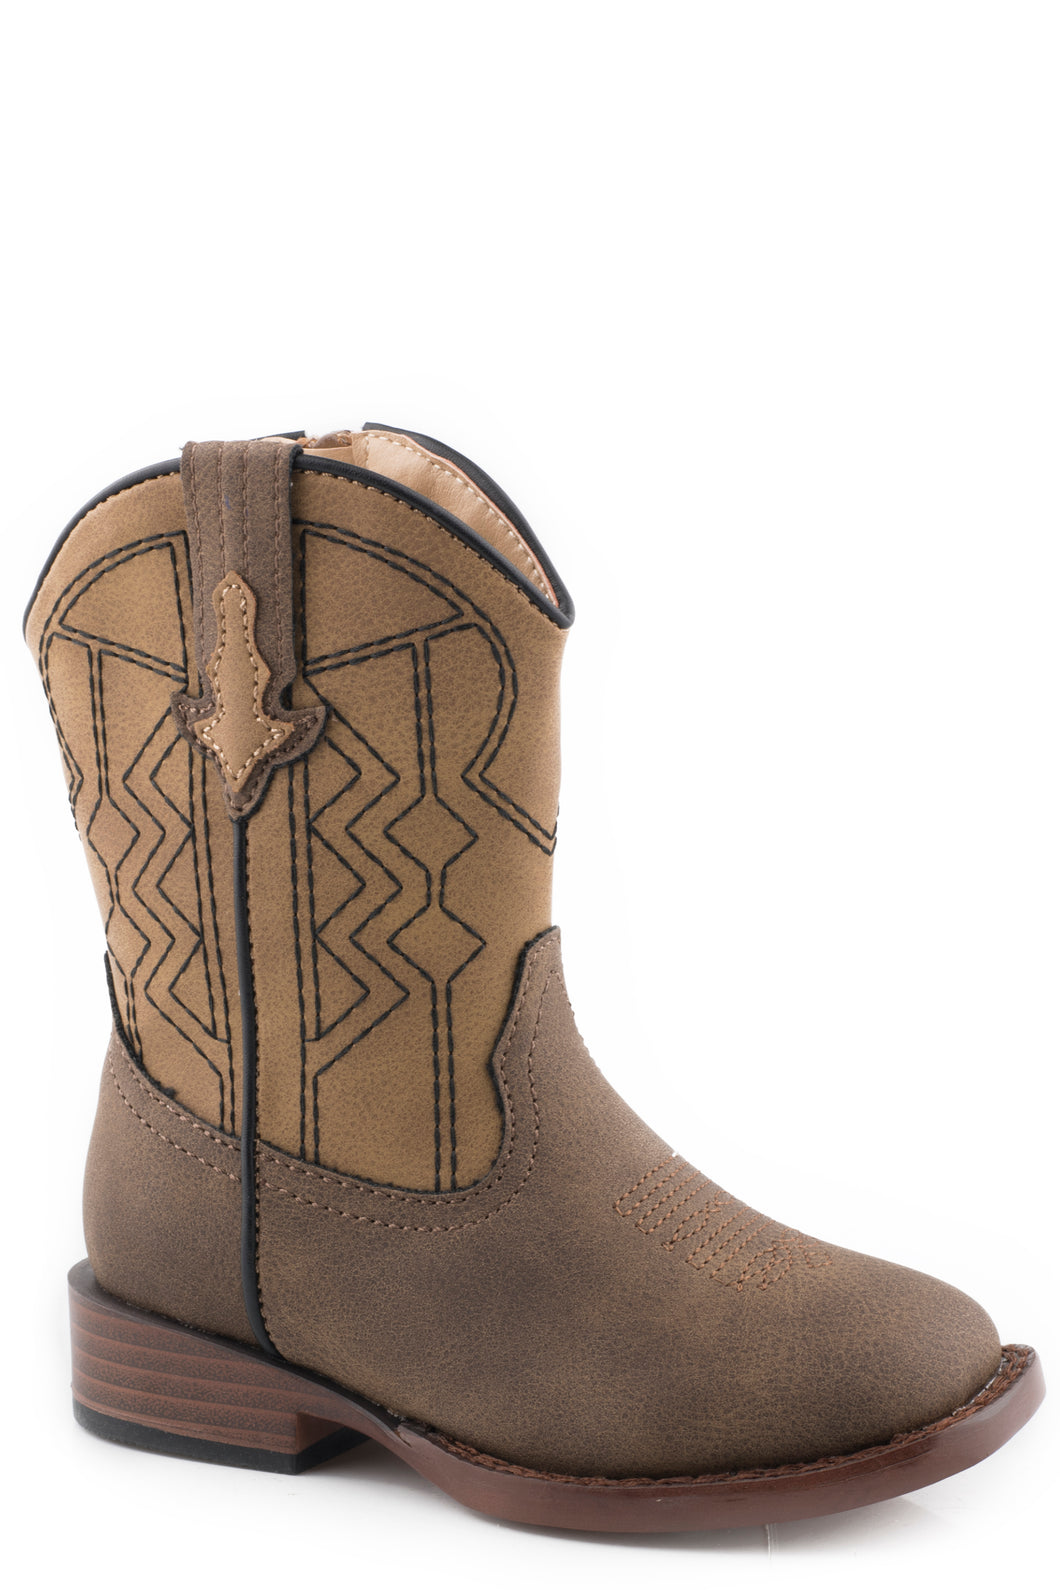 ROPER TODDLER CASSIDY BOOTS